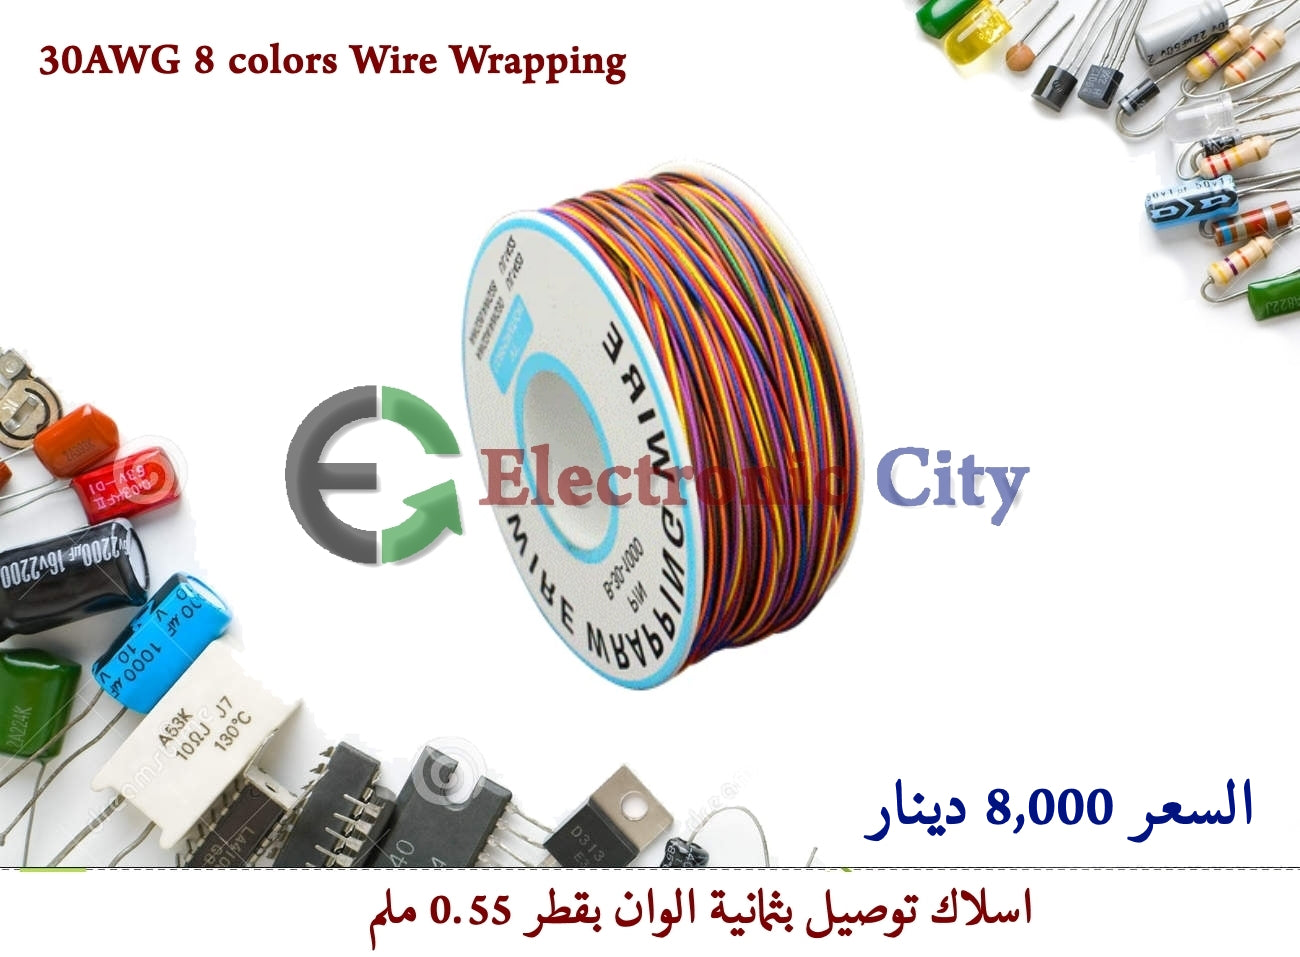 30AWG 8 colors Wire Wrapping #C11